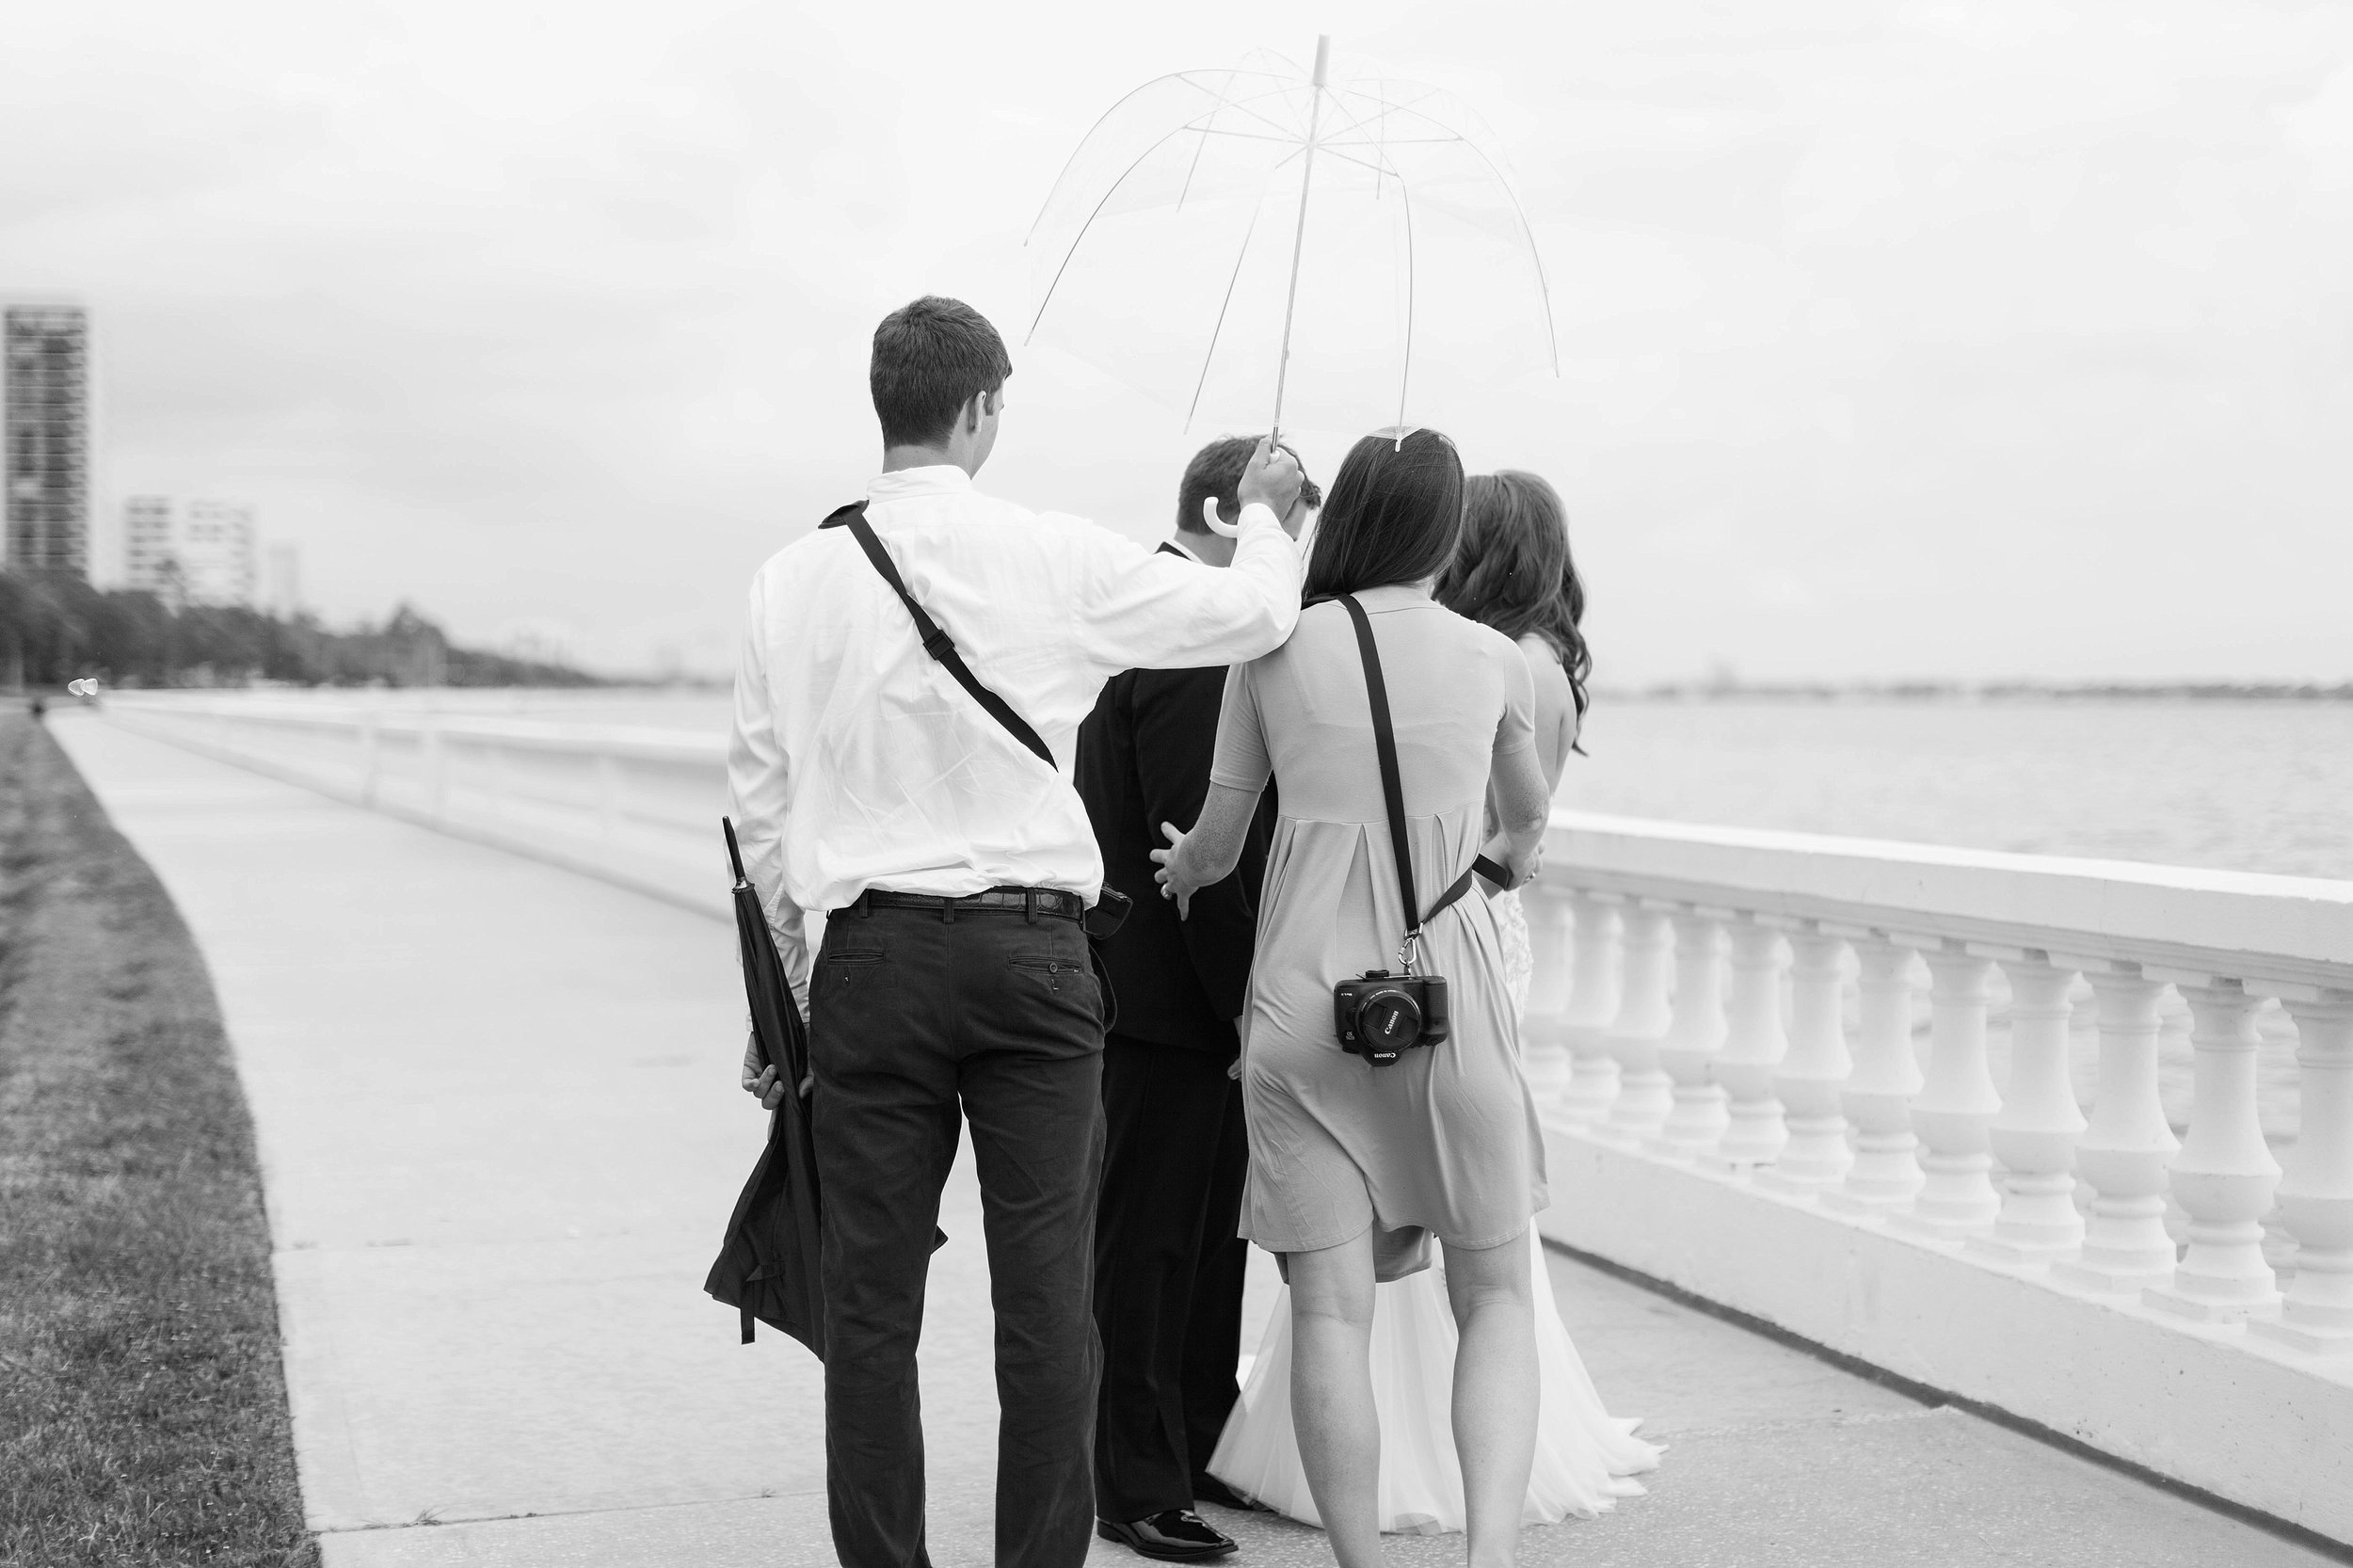 Thank you Chase for always holding the umbrellas. Have I mentioned he's the best? Worth noting again. 